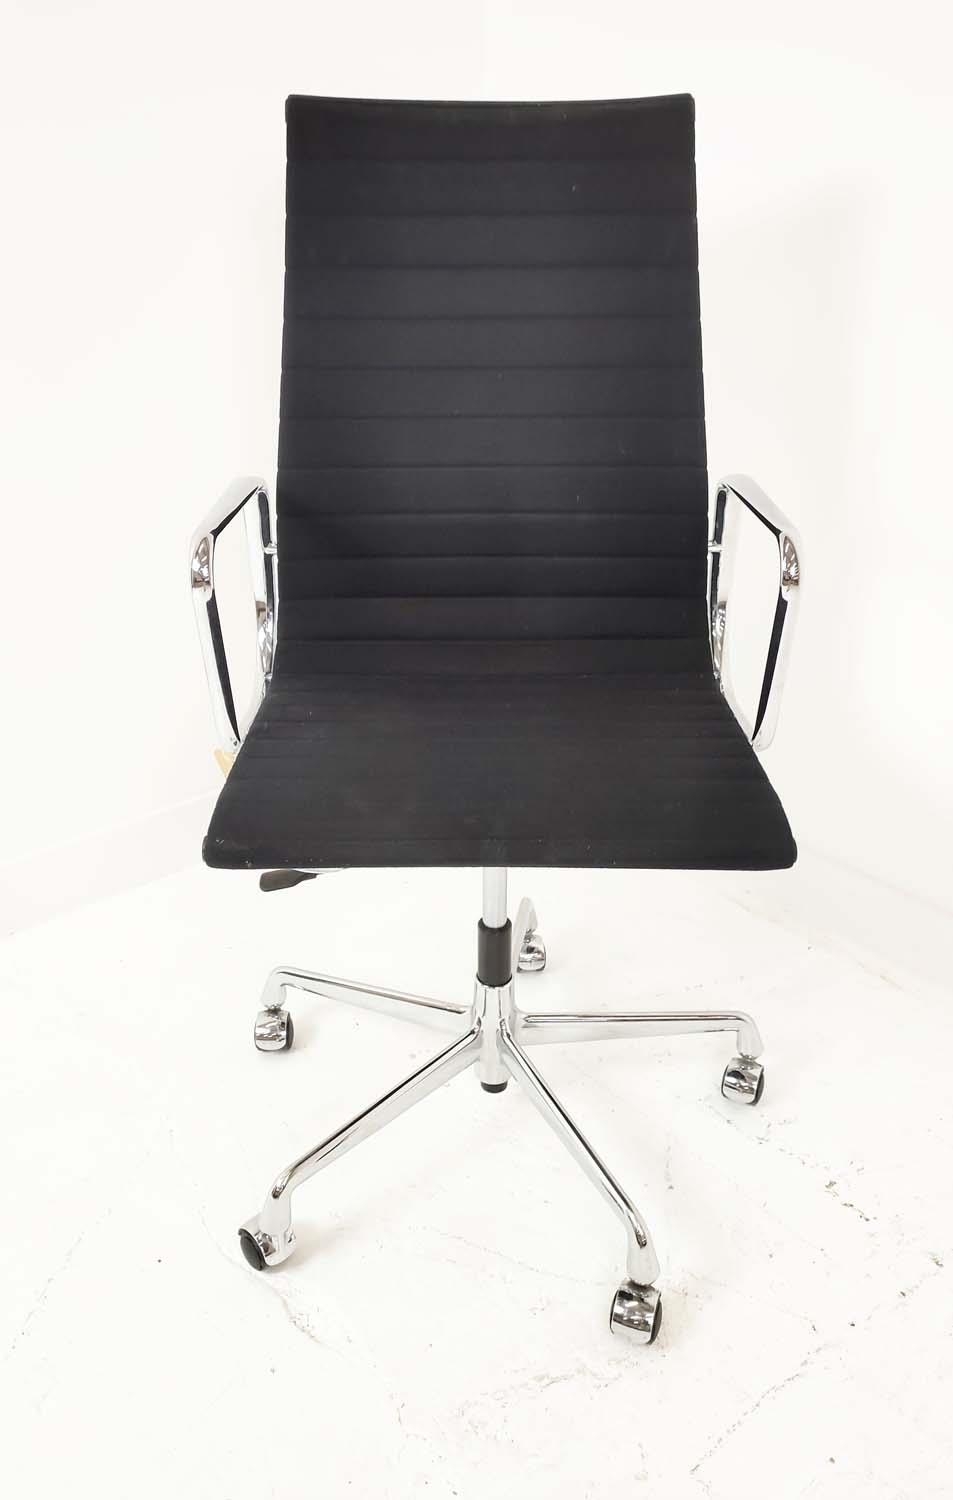 VITRA ALUMINIUM GROUP CHAIR, by Charles and Ray Eames, 113.5cm H at largest. - Image 5 of 9